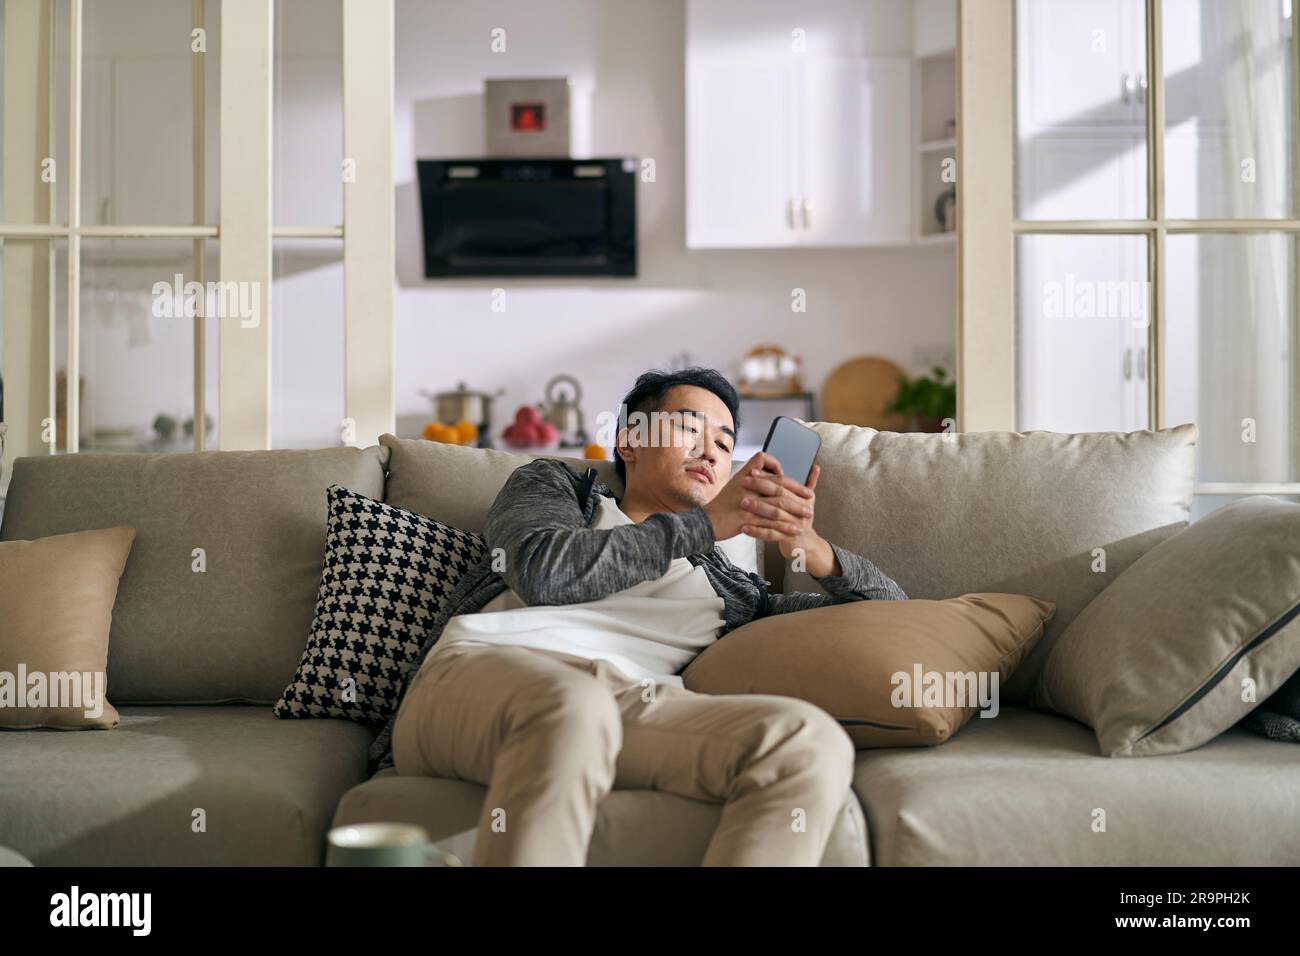 young asian adult man lying on couch looking at cellphone at home, concept for smartphone or social media addiction Stock Photo